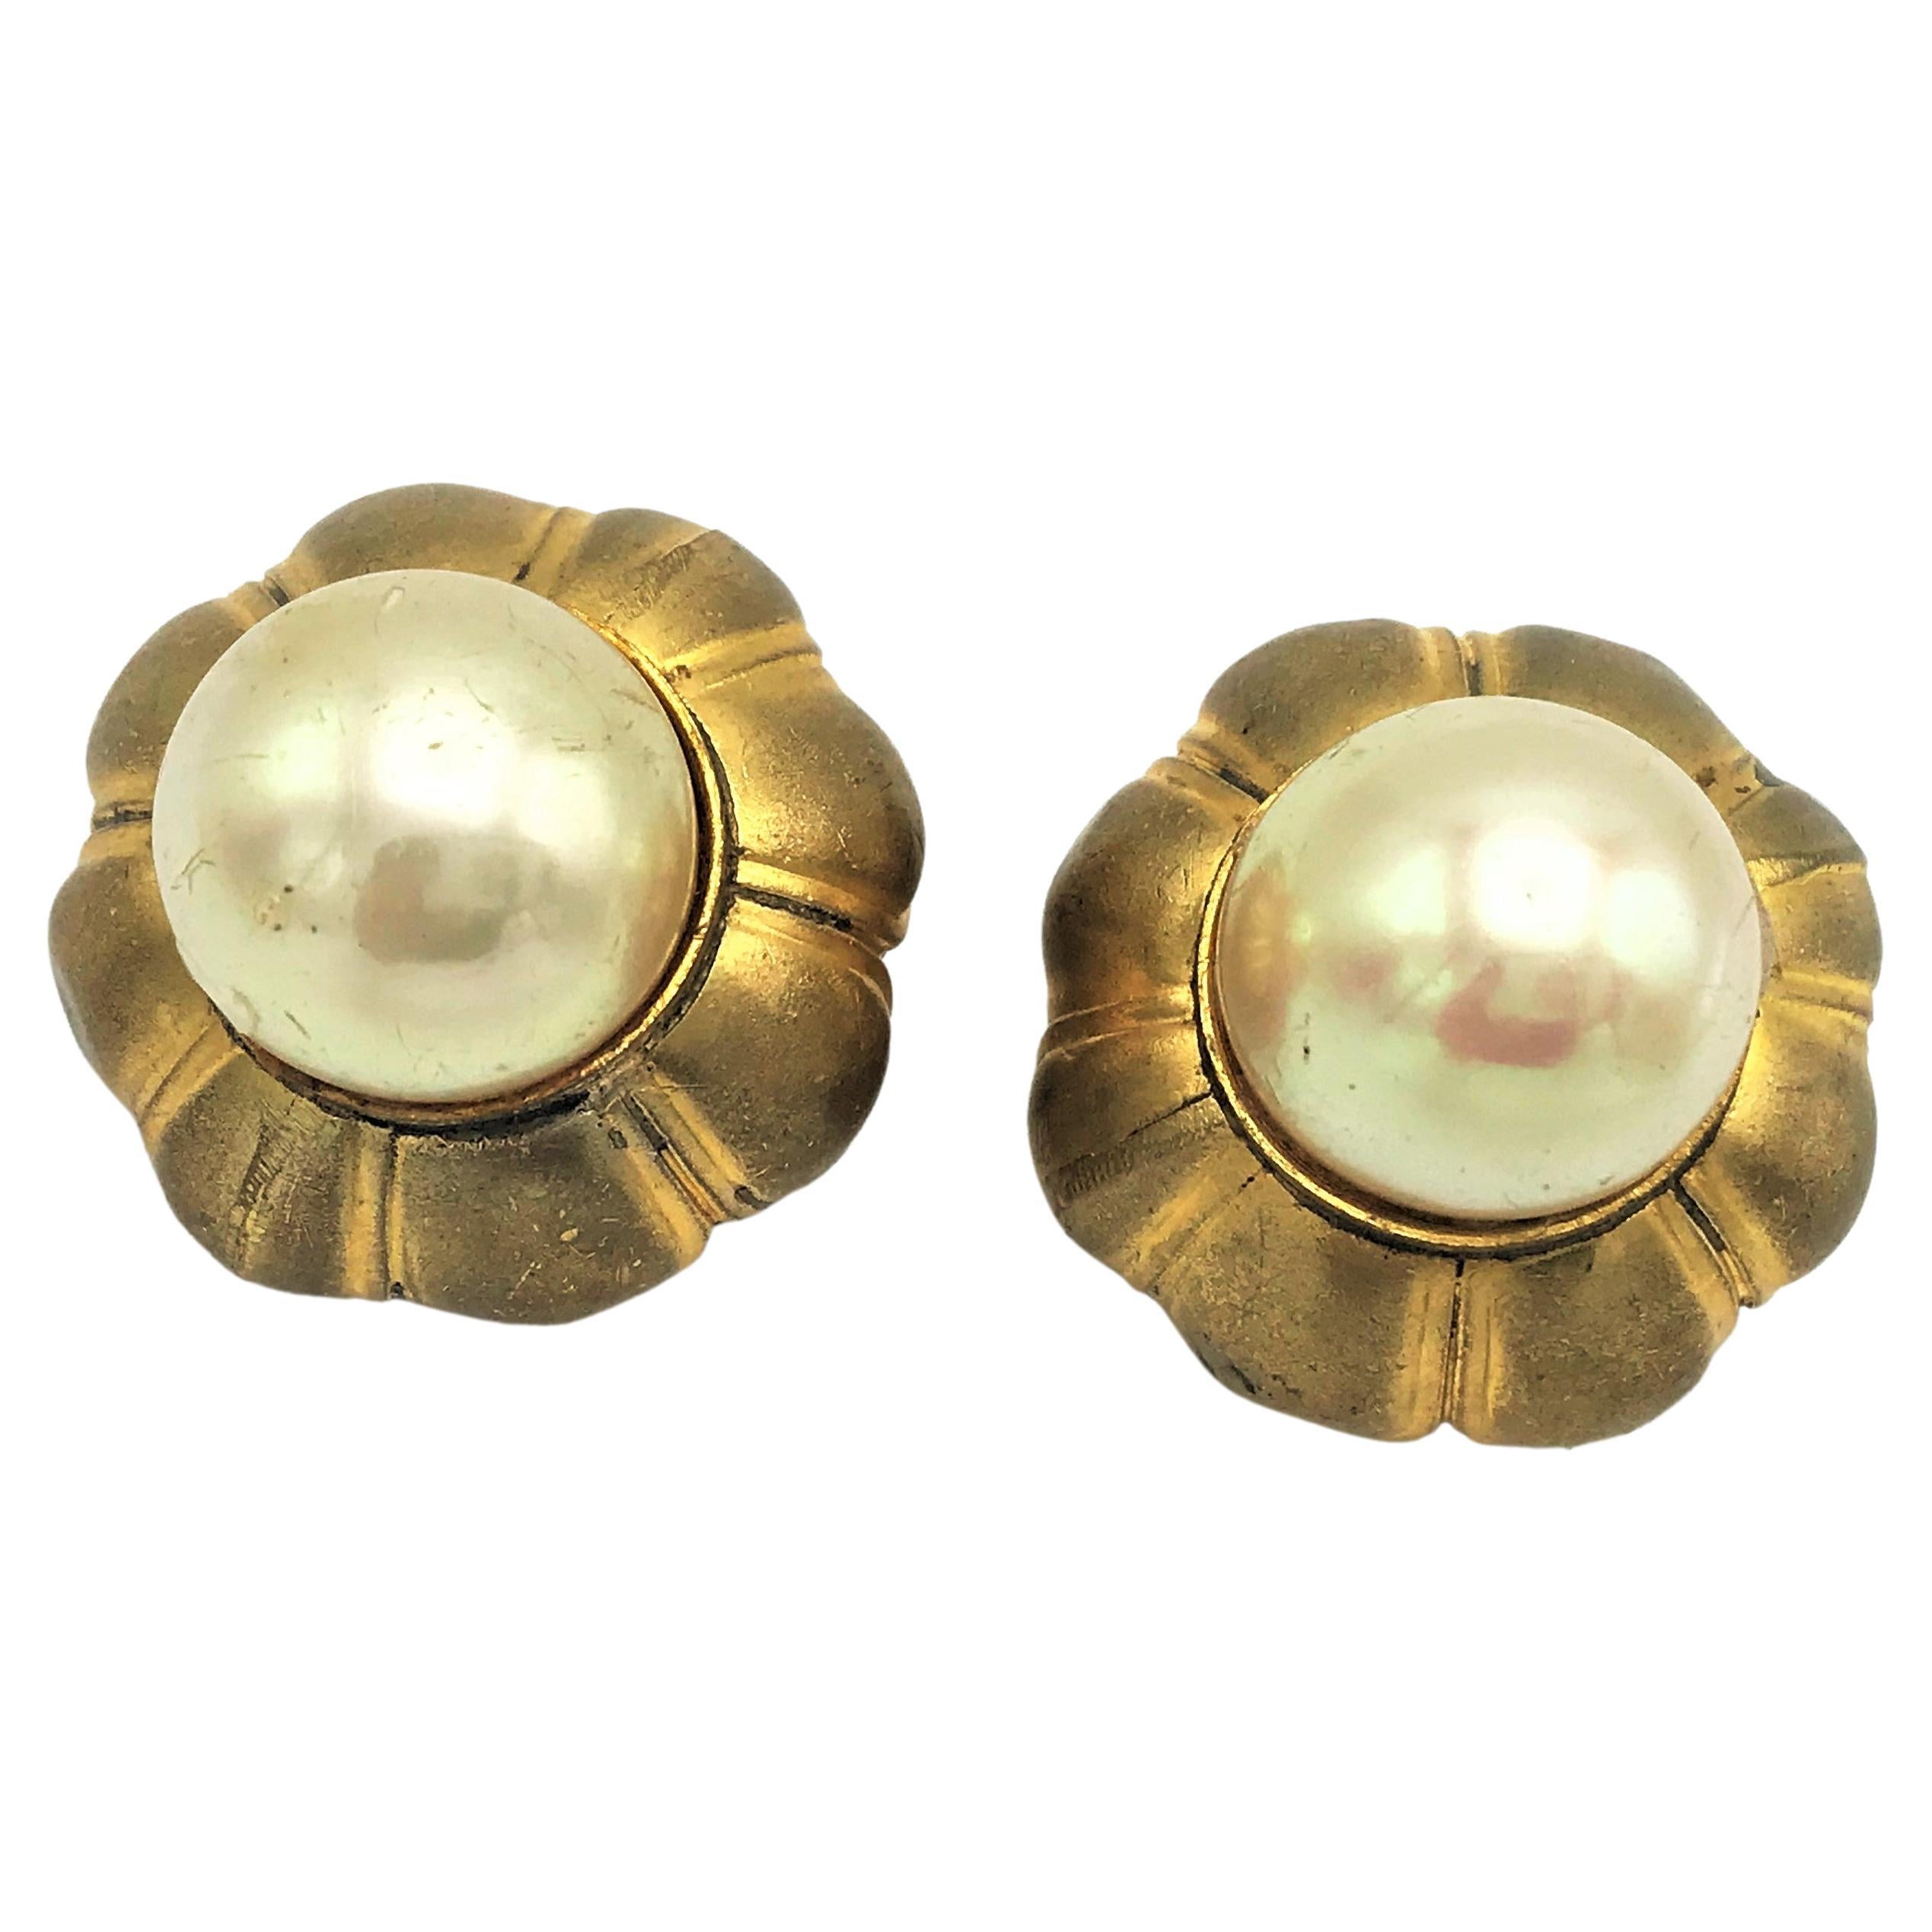  CHANEL clip-on earring, rund, barock pearl, not signed, 1970s, gilt metal For Sale